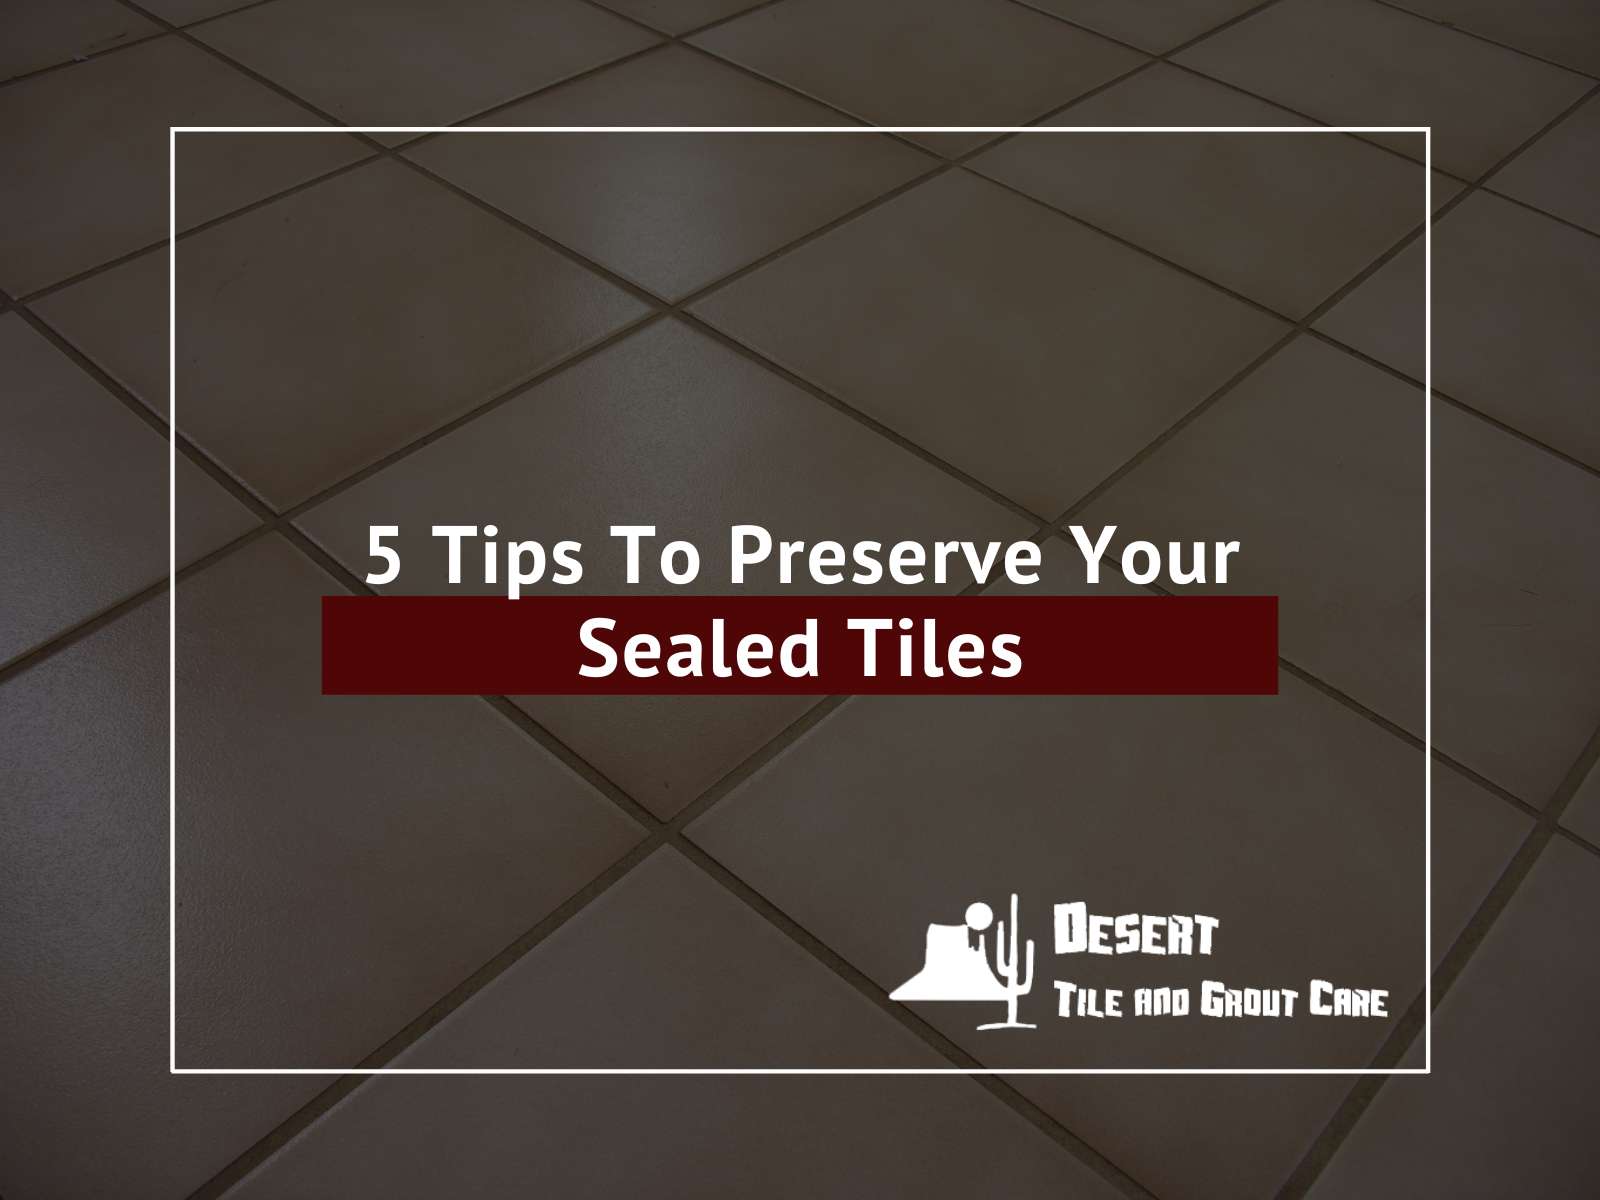 5 Tips To Preserve Your Sealed Tiles